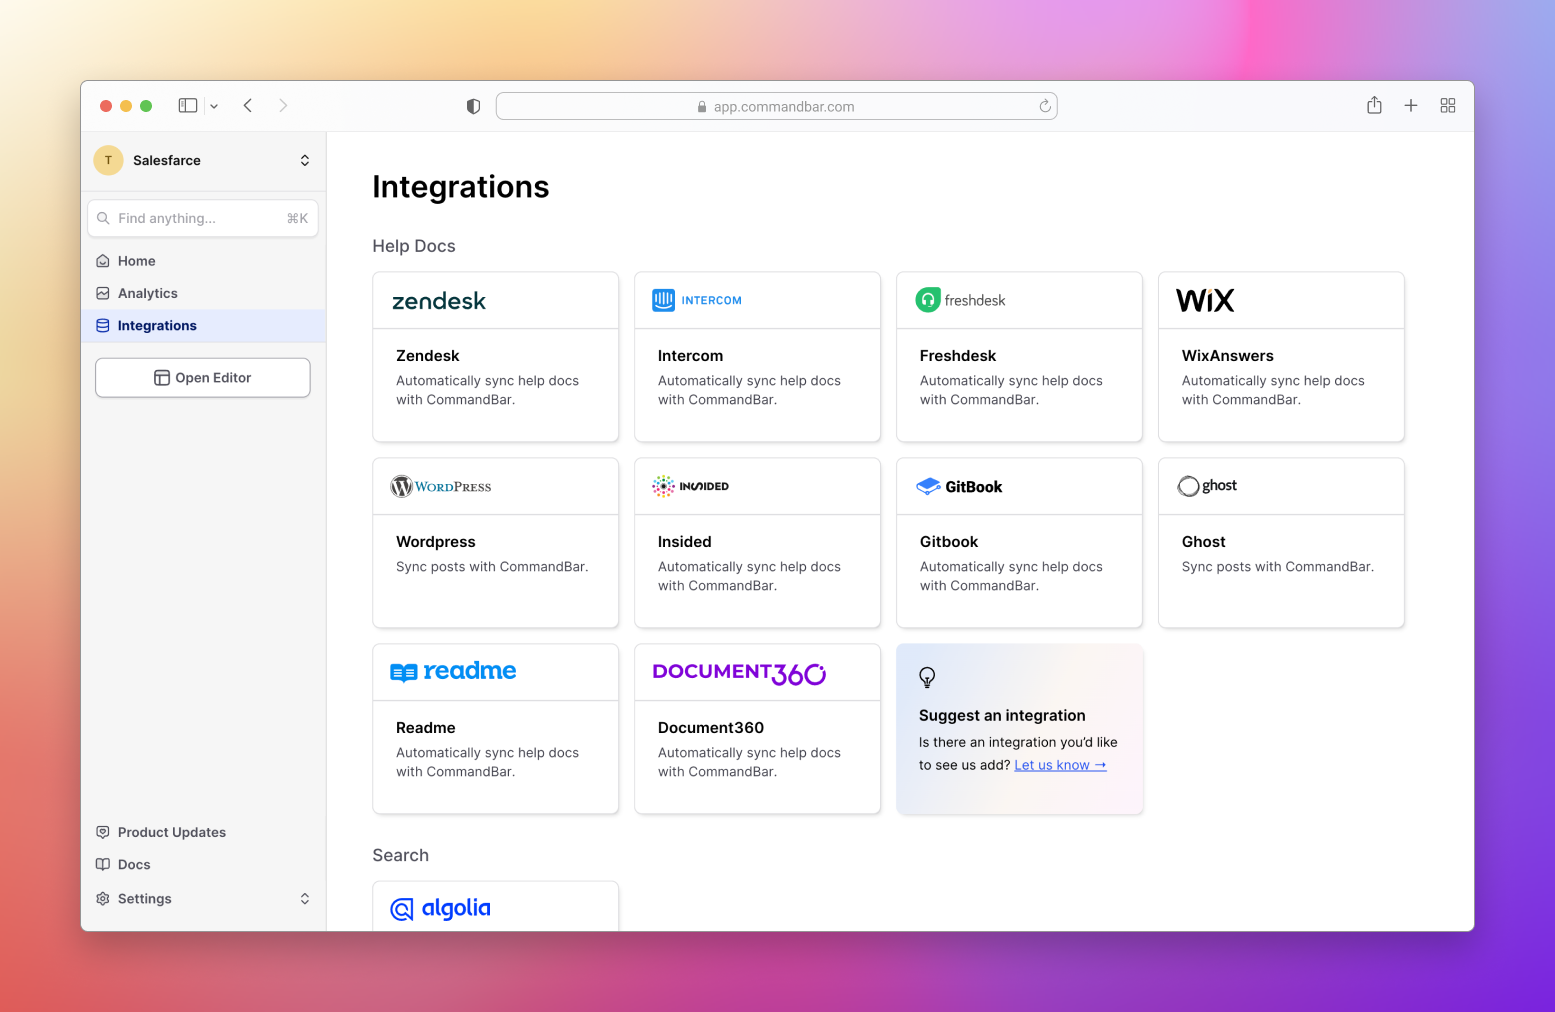 Plug your tools into CommandBar. Built-in integrations for help doc sync, analytics, embedding video, exporting data, and more - no code required.